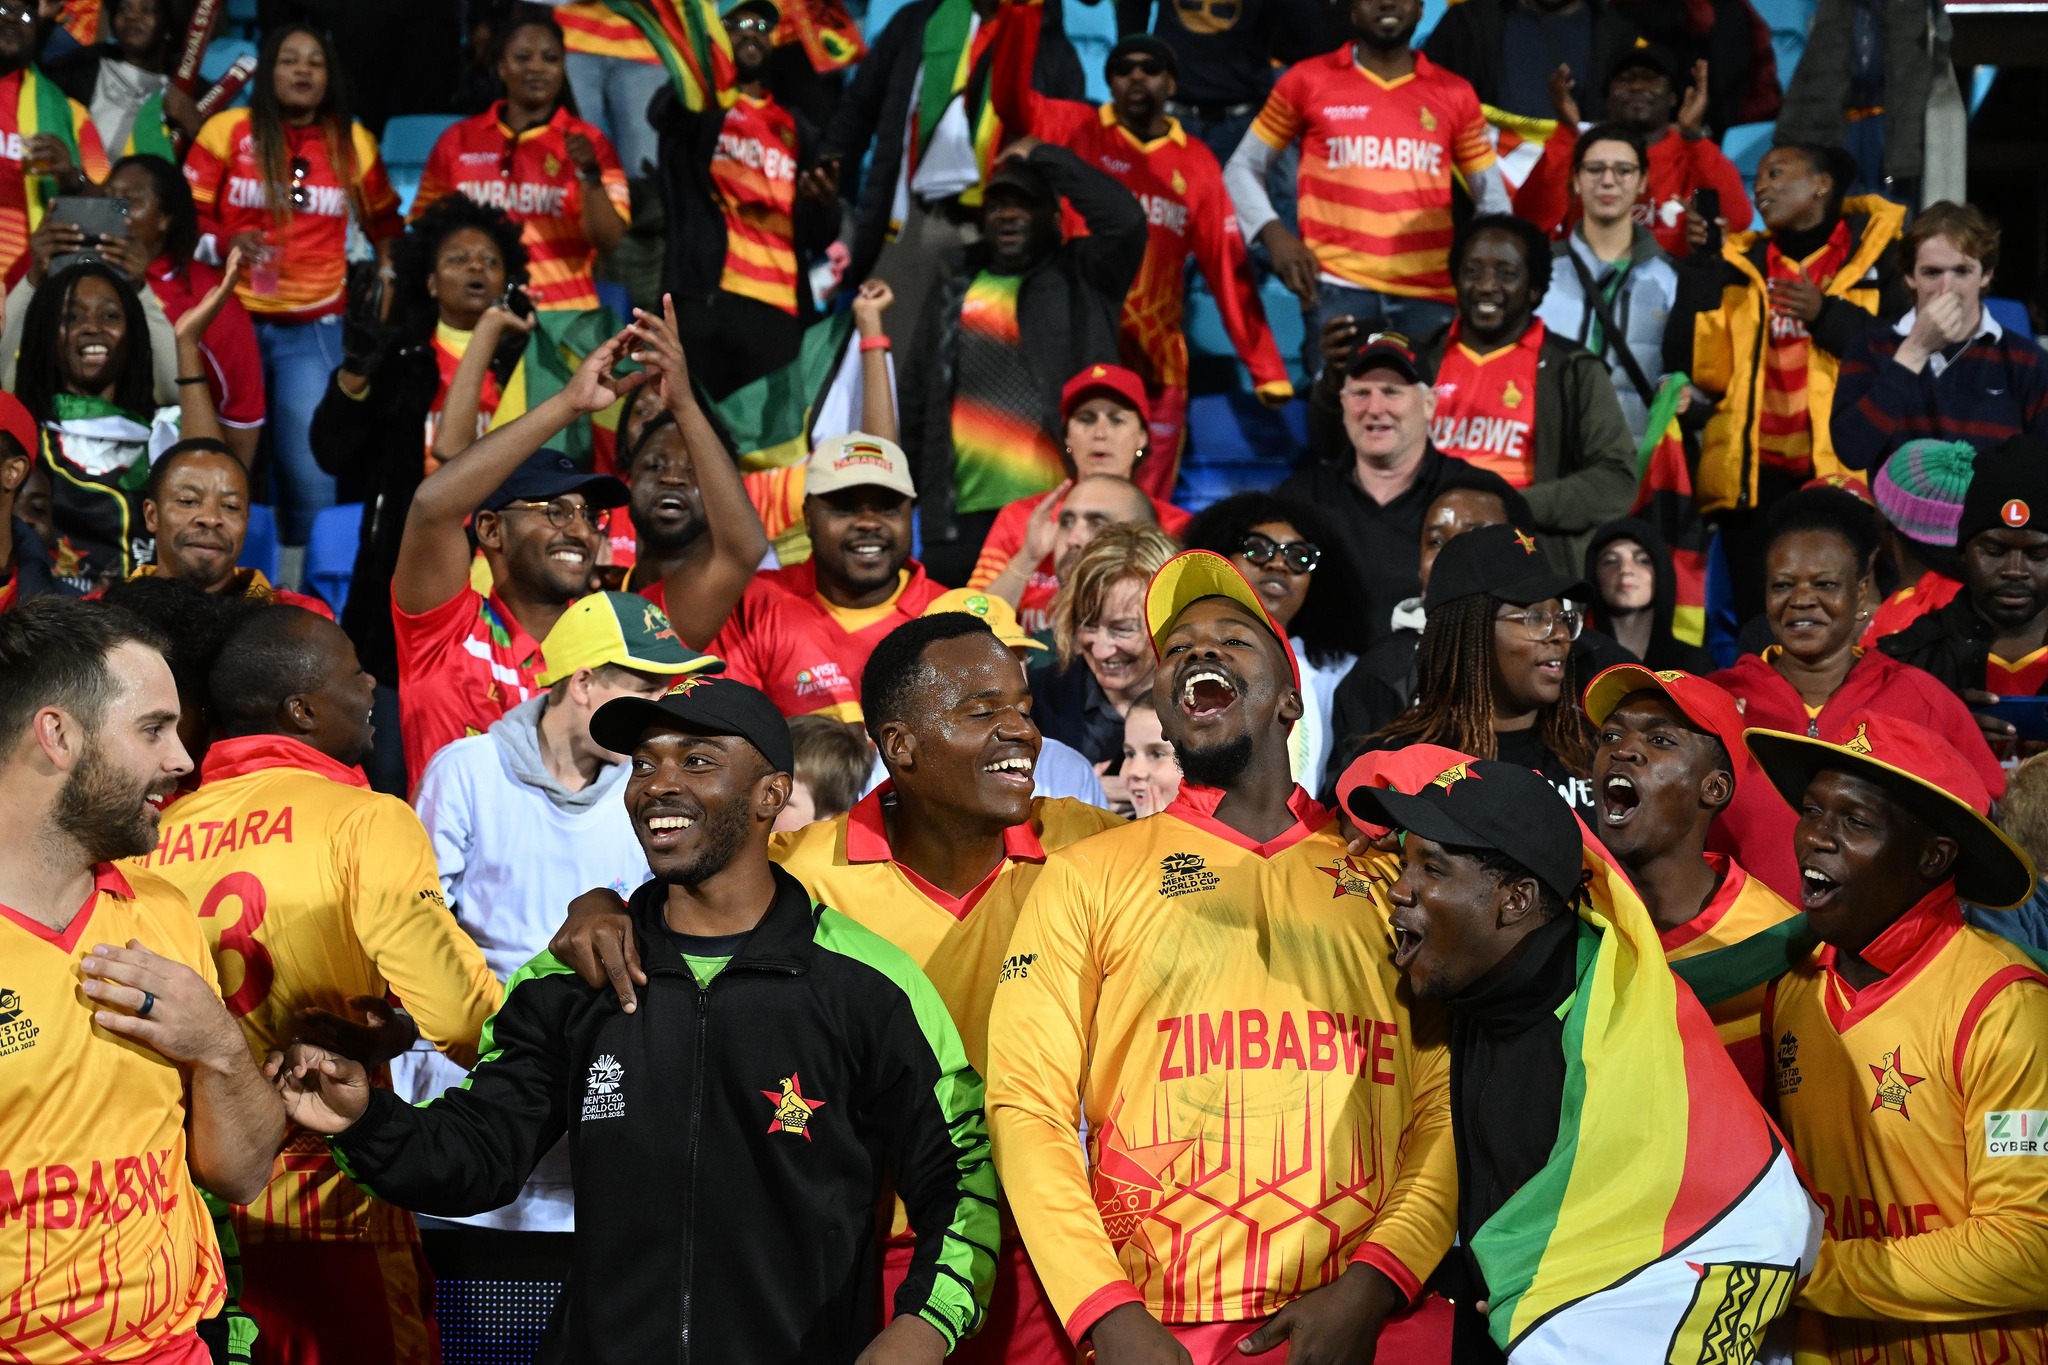 ZIM CHEVRONS ARE THROUGH TO THE SUPER 12